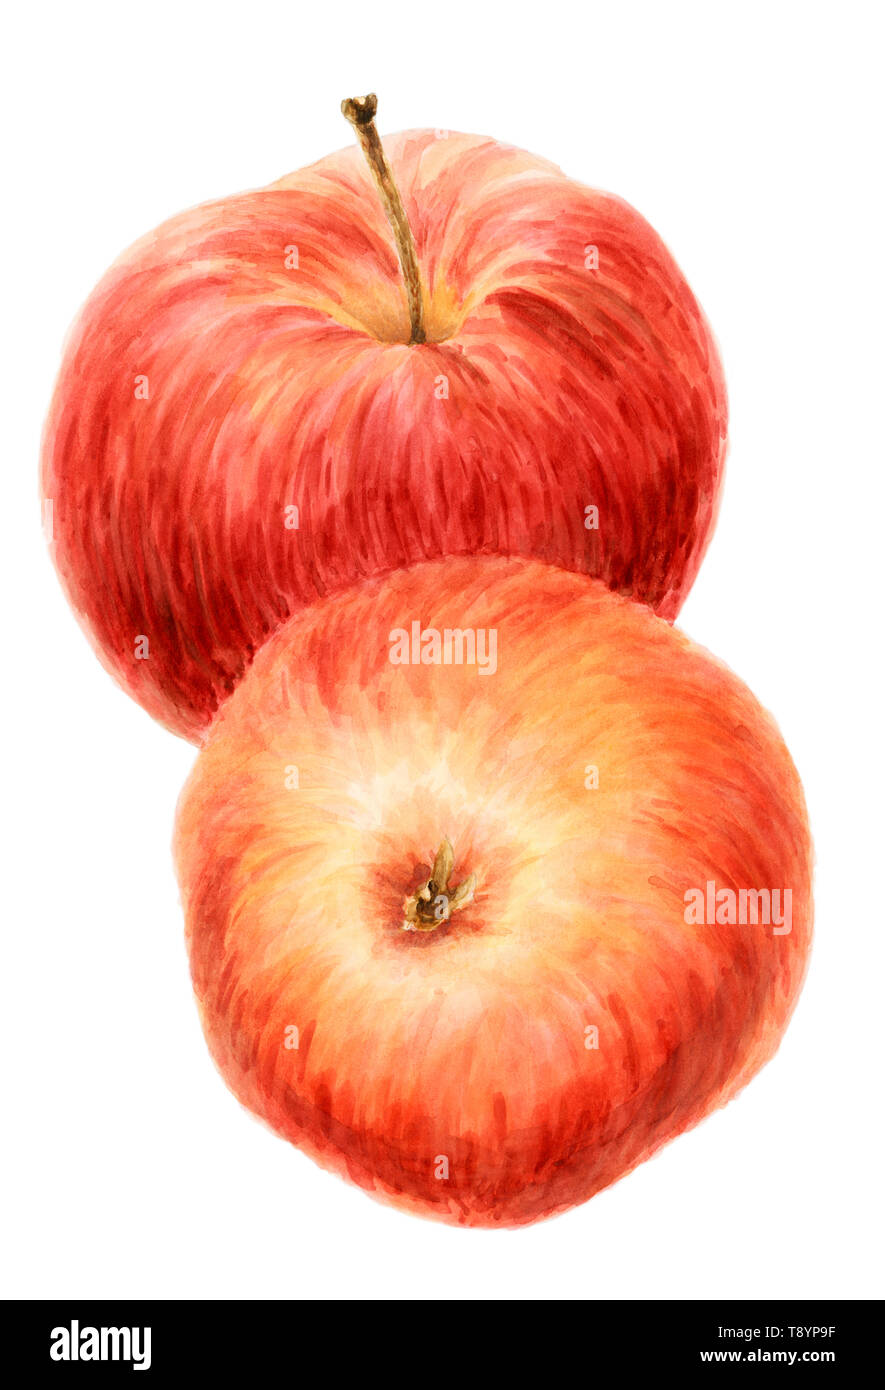 Two red apple fruits (Malus domestica) over white background. Watercolor on paper. Stock Photo